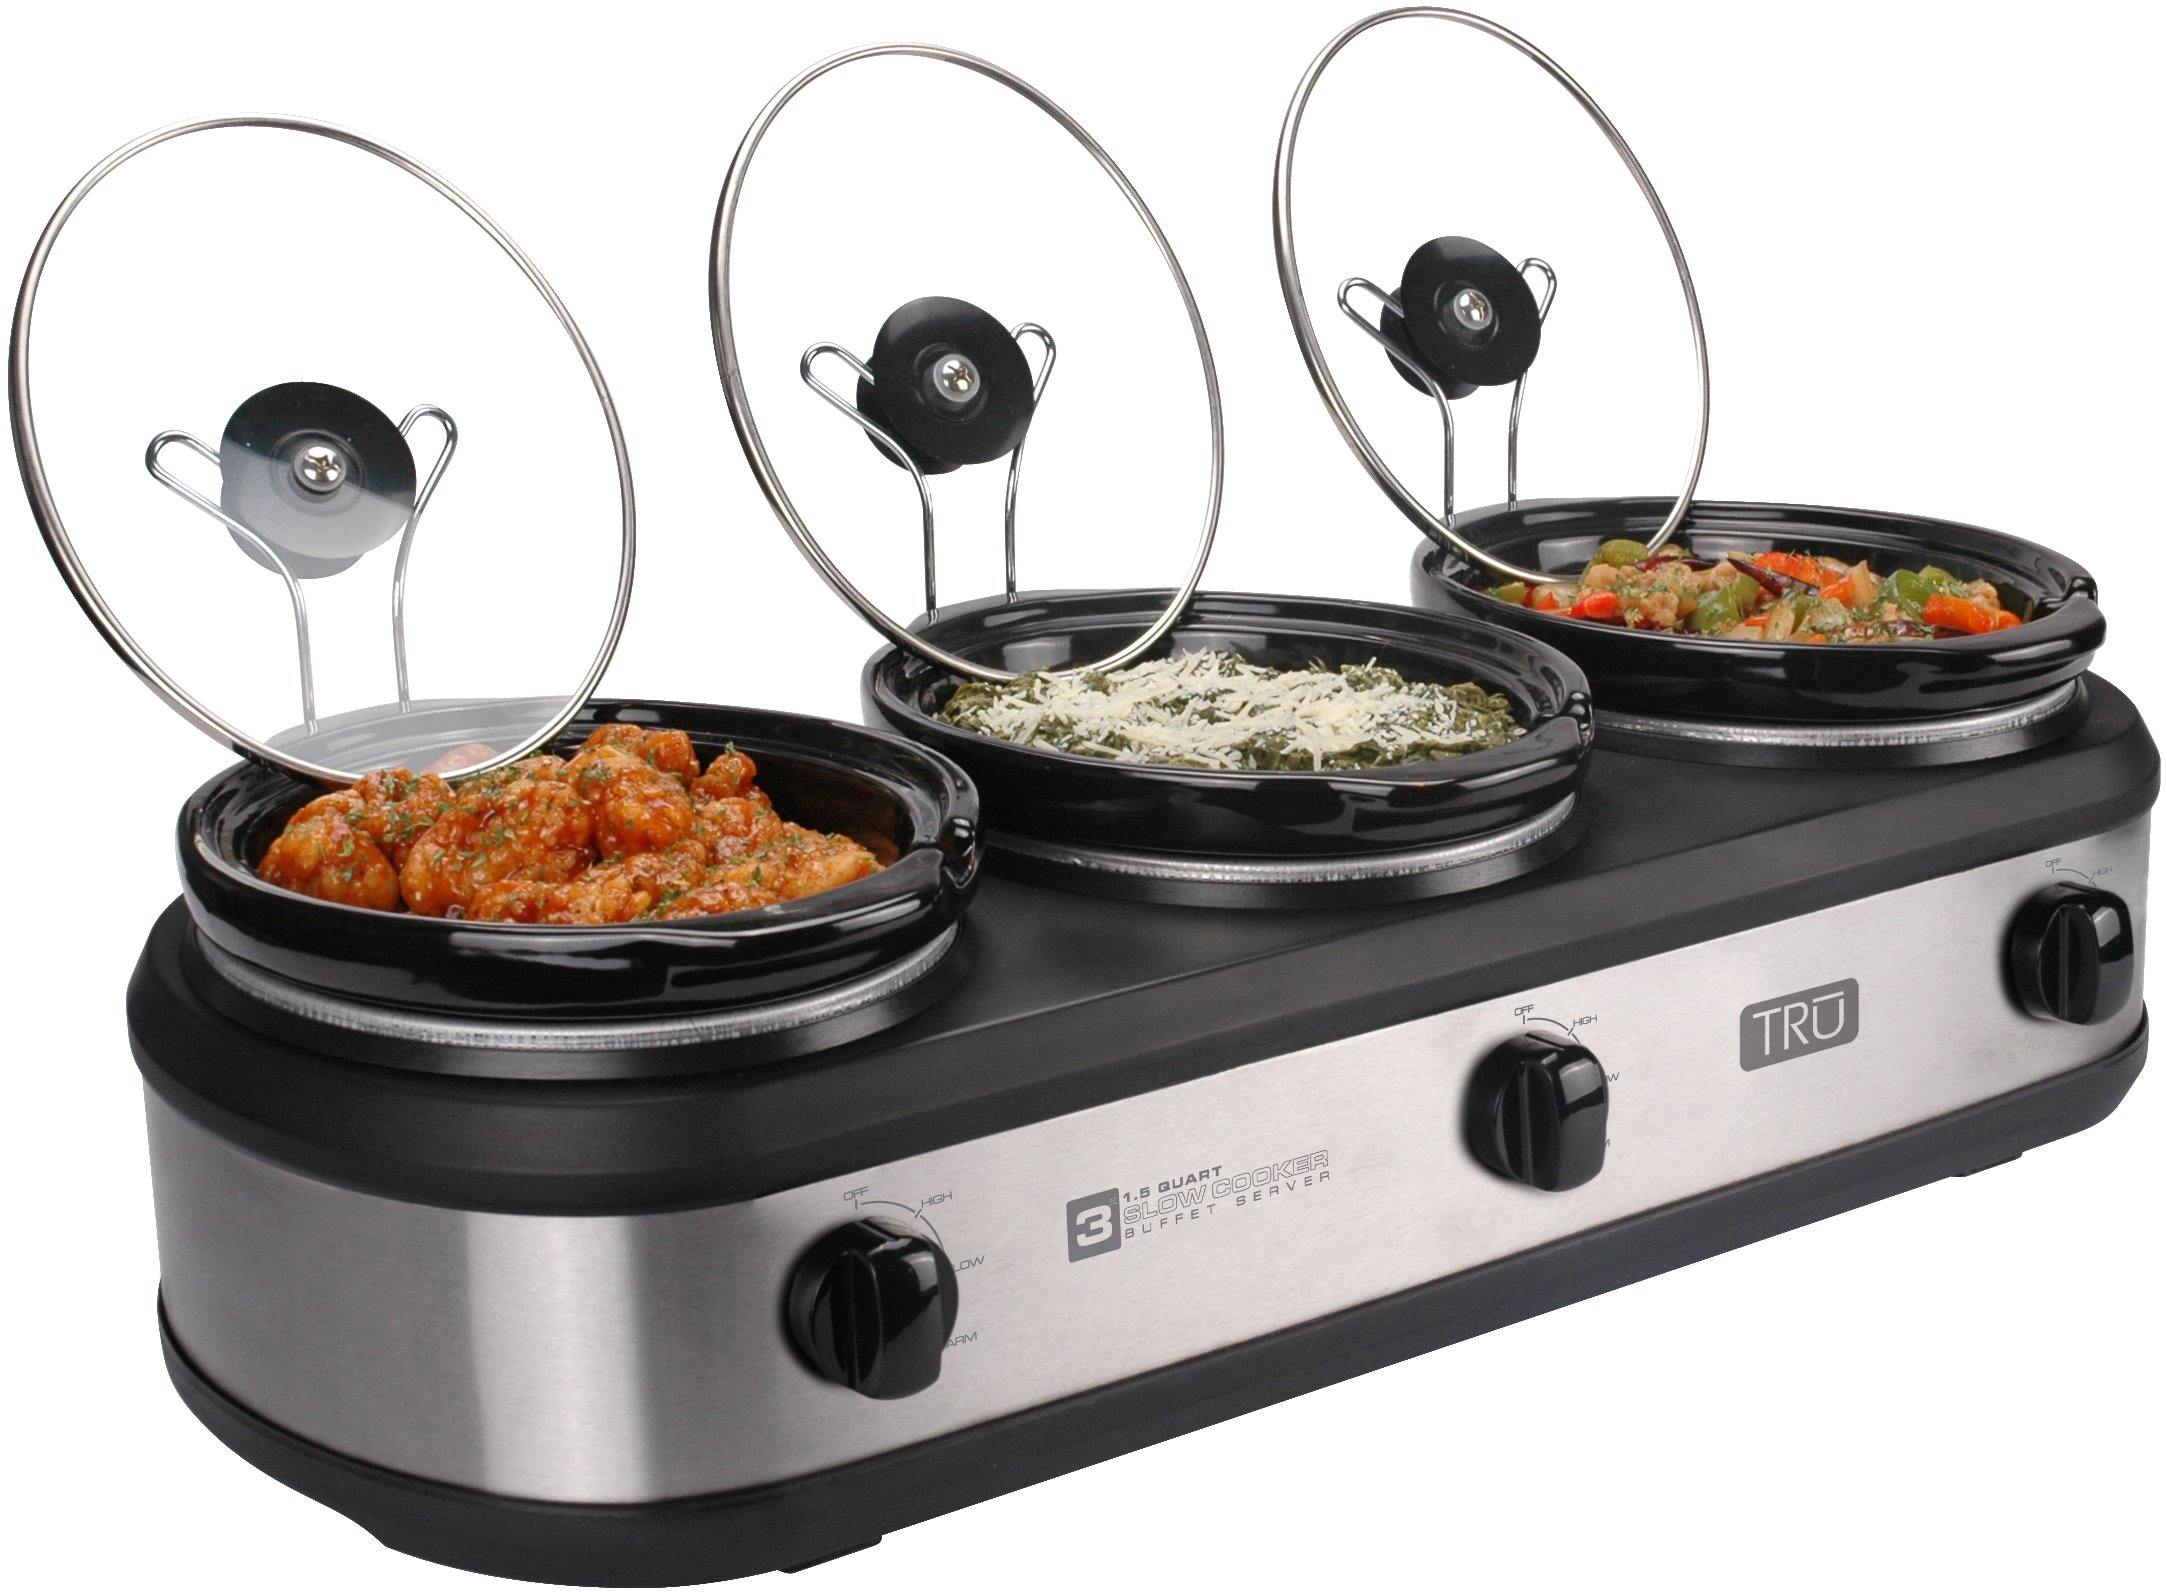 Triple Slow Cooker with 3 Spoons, 3 Pot 1.5 Quart Oval Crock Food Warmer  Buffet Server, Stainless Steel